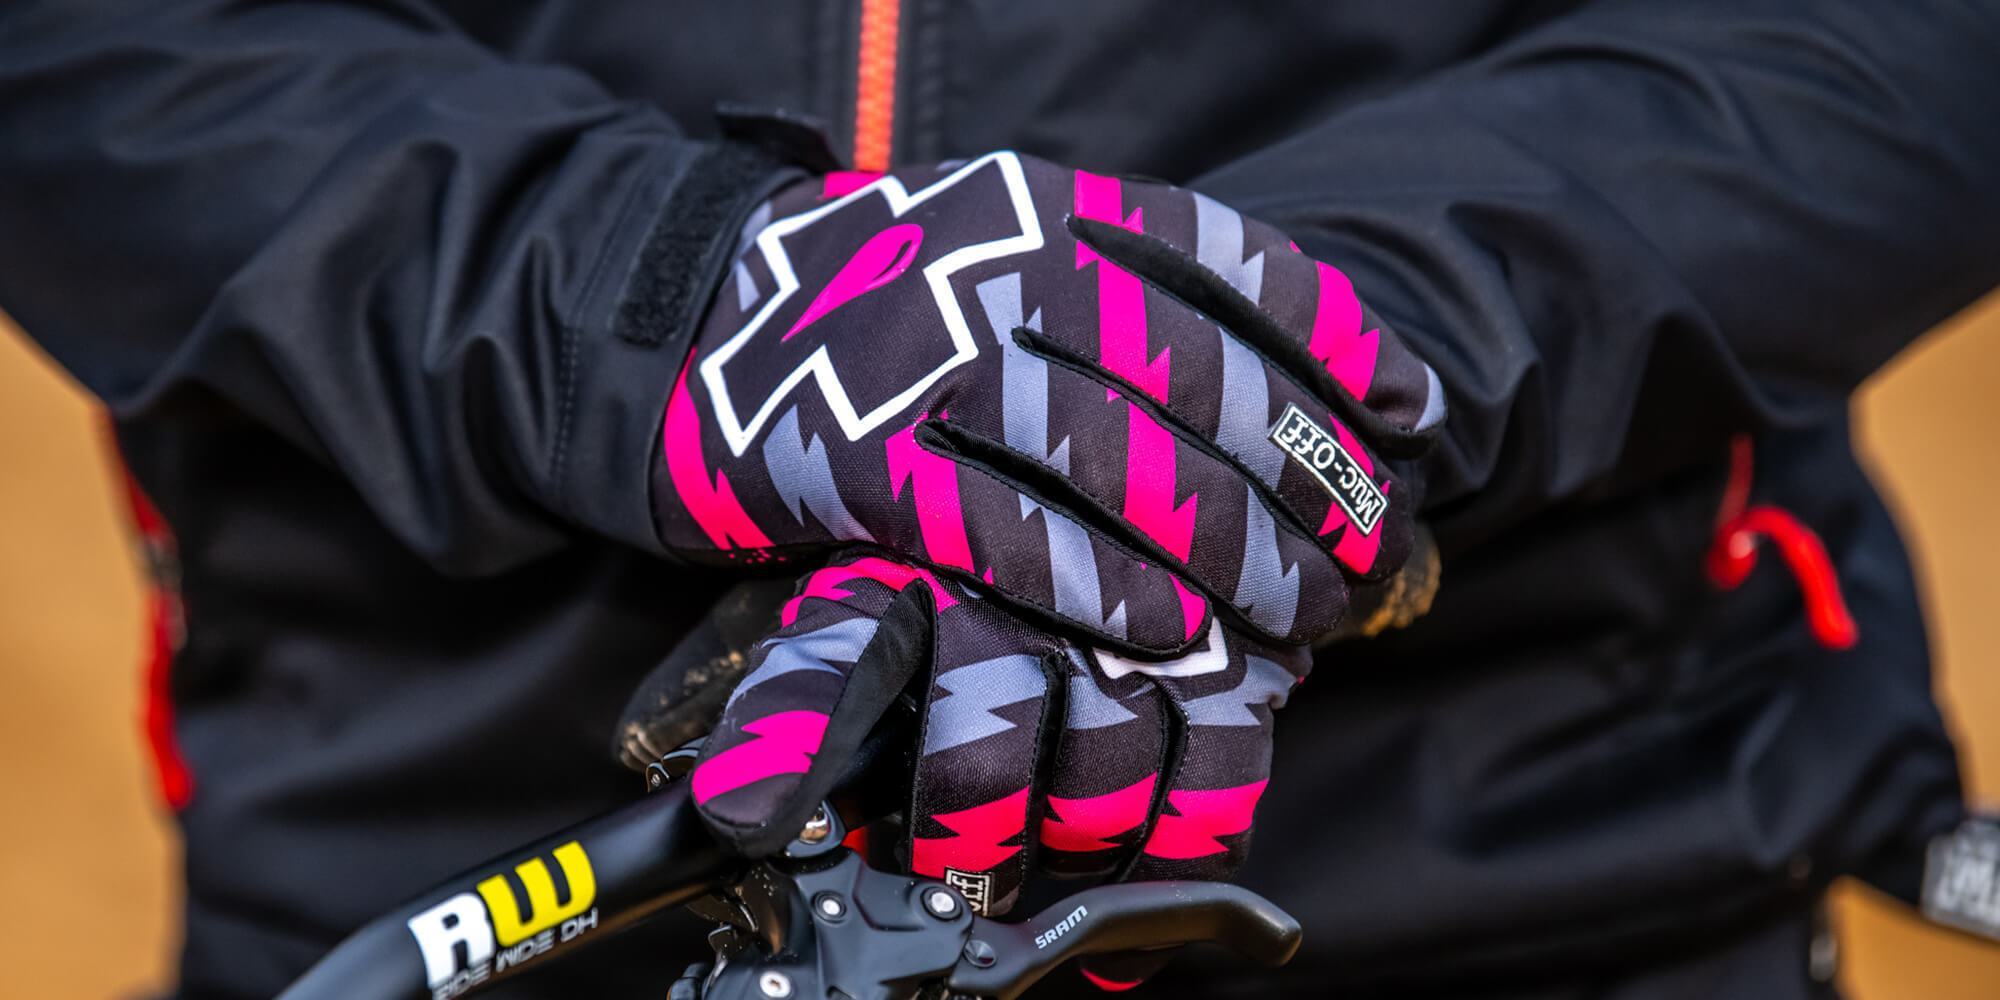 Riding Gloves, Cycling Gloves, Technical Apparel